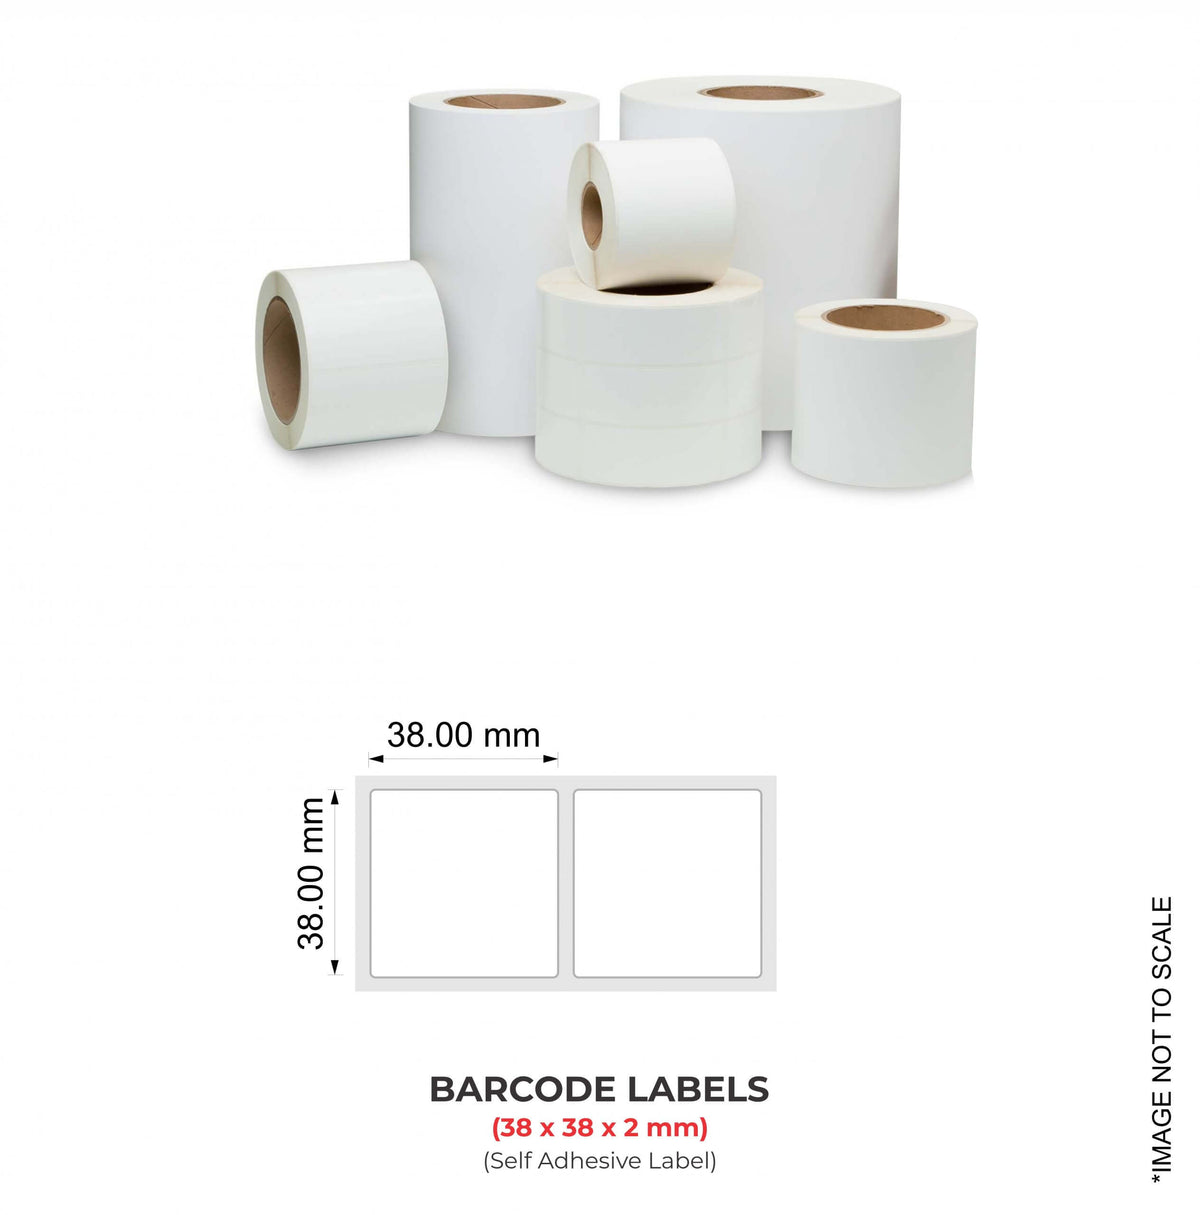 Barcode Labels (38mm x 38mm x 2) (1.5" x 1.5"), 3000 Labels Per Roll (Self Adhesive Label)